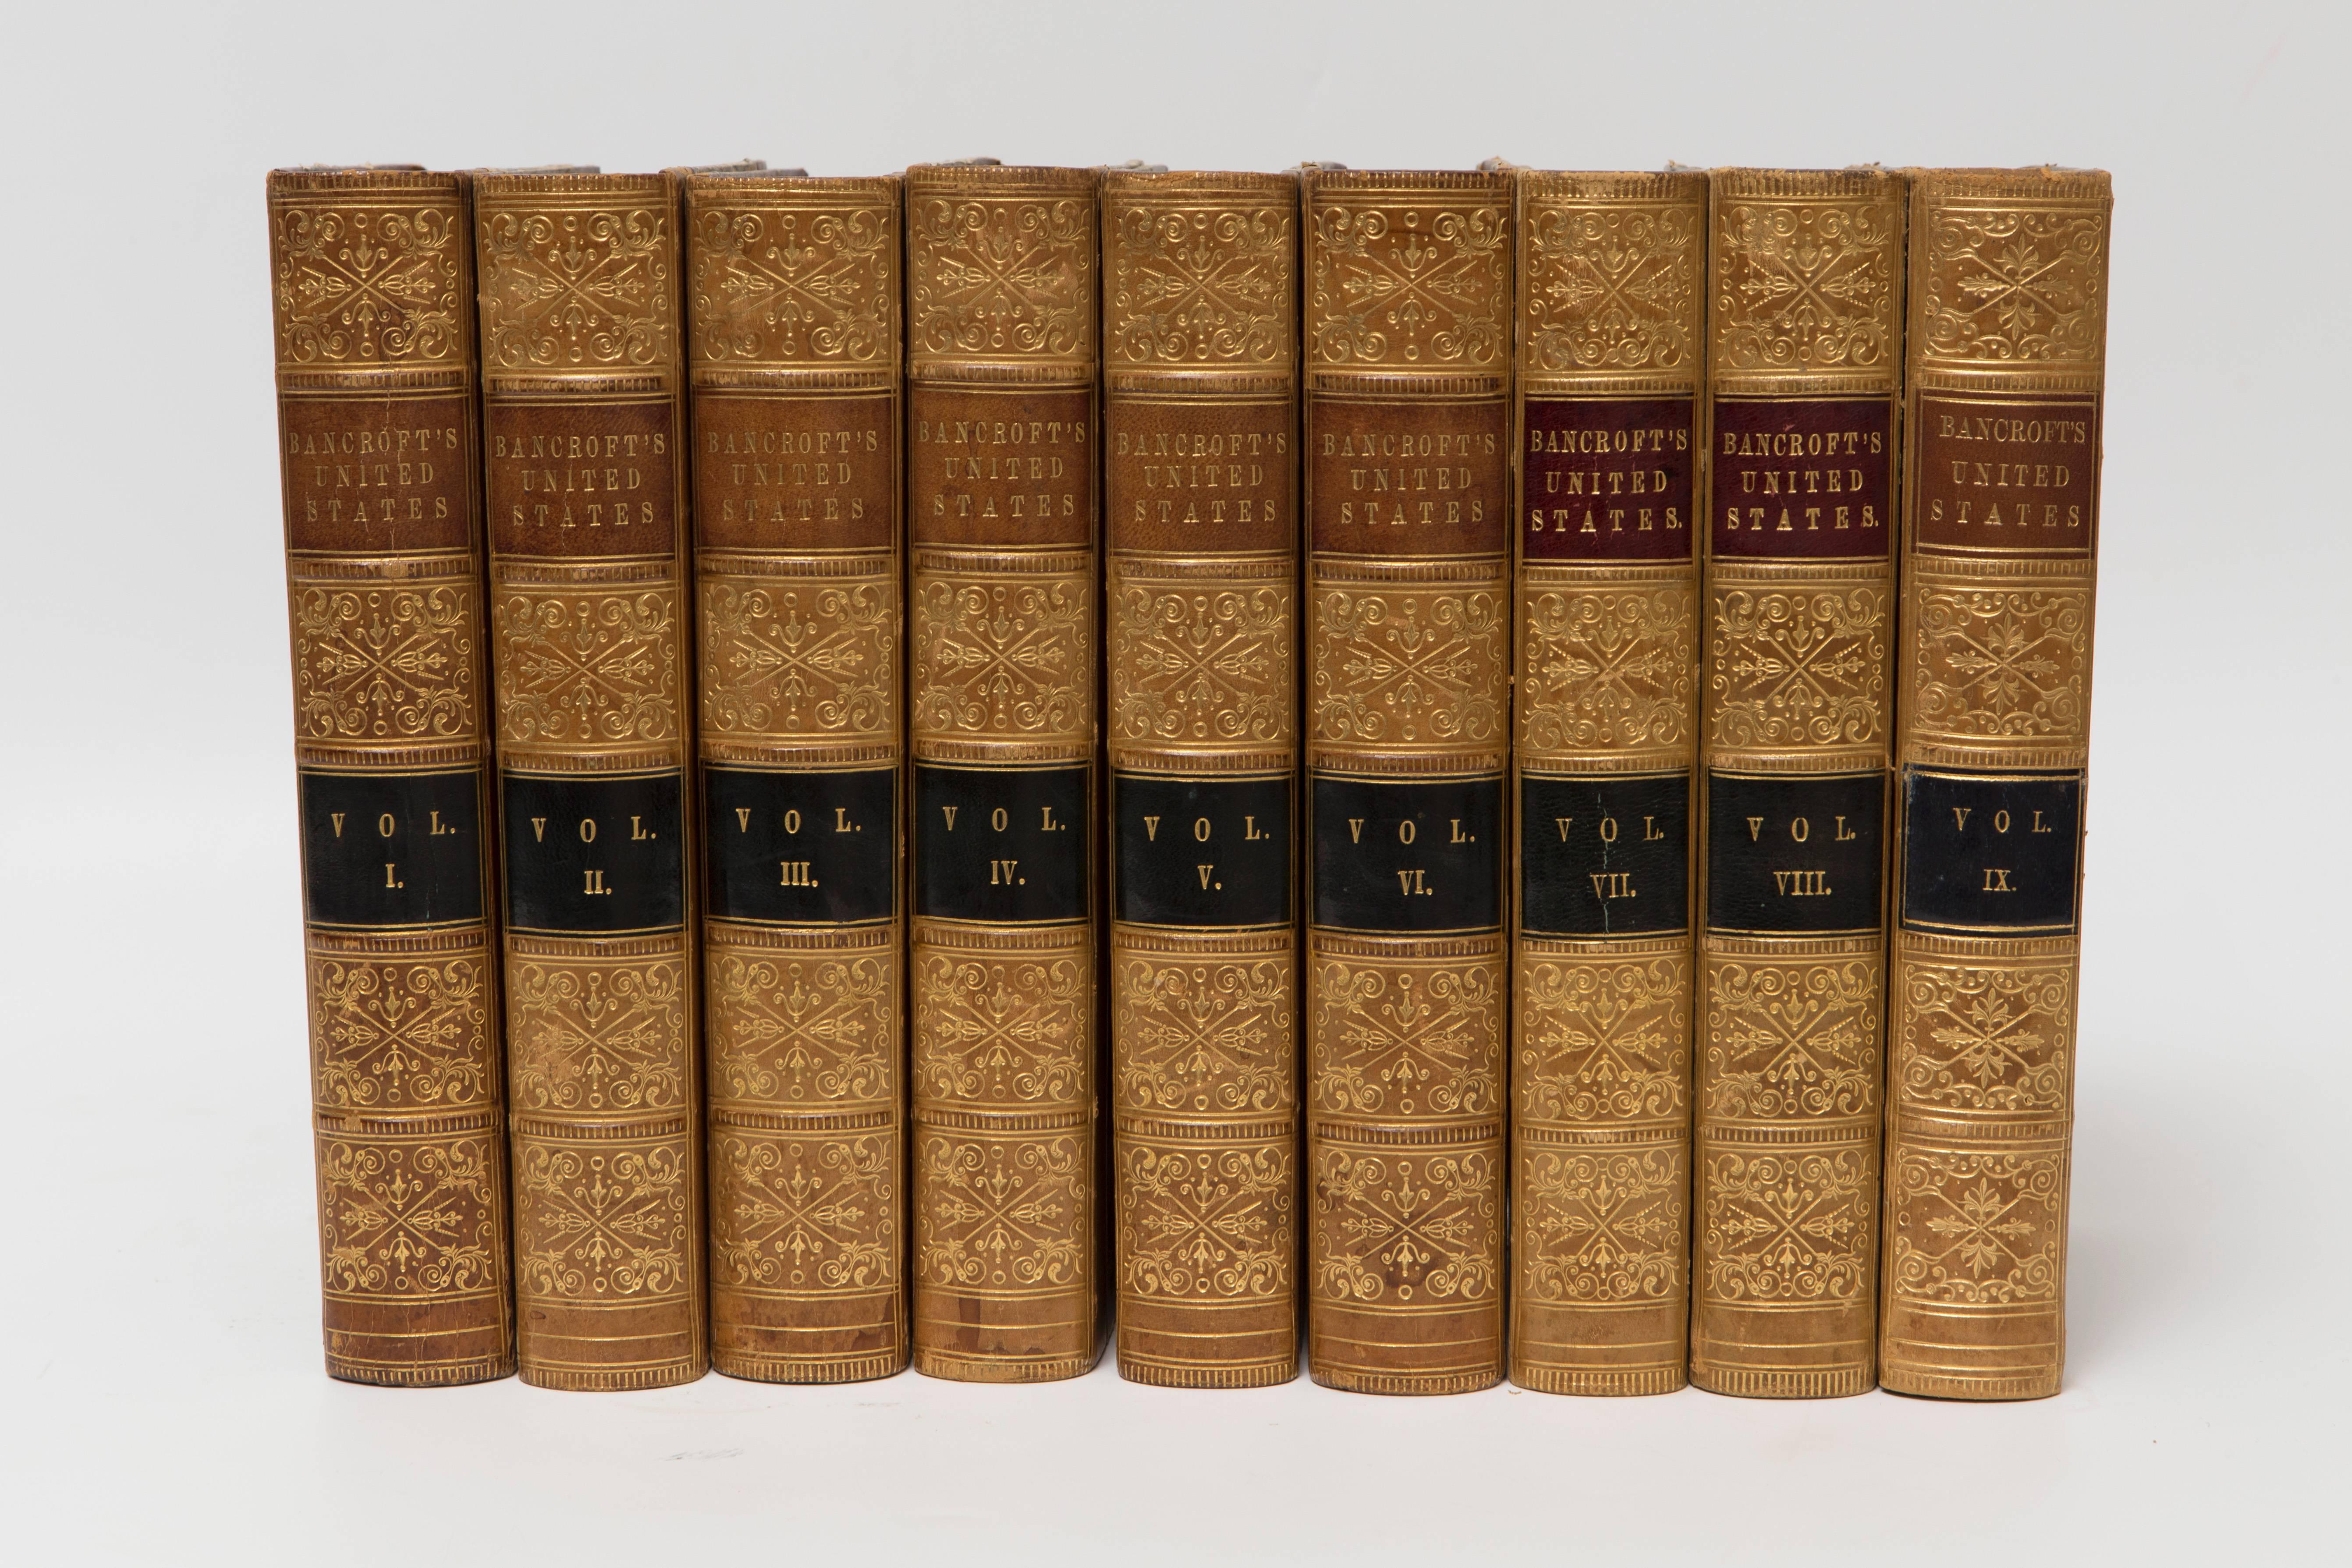 History of the United States from the Discovery of the American Continent by George Bancroft 15th edition. Boston: Little, brown and company 1856.
Very Pretty gold Spines.